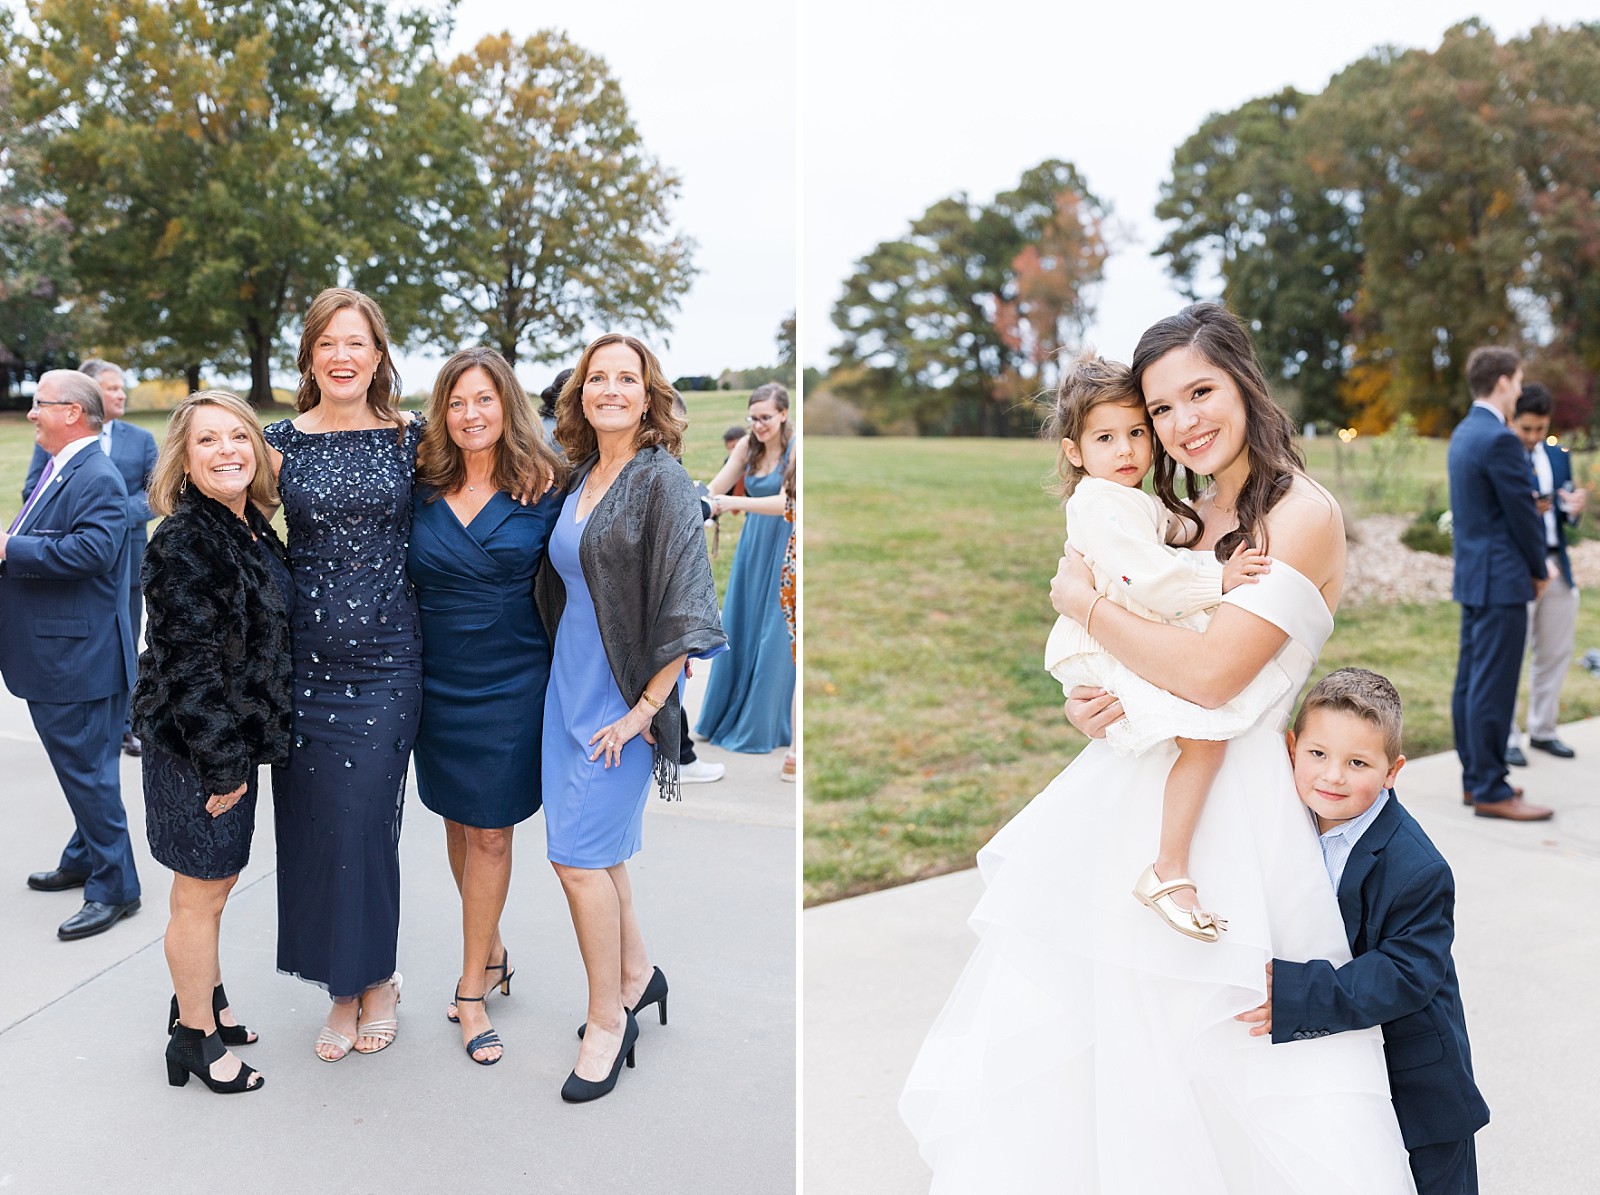 Wedding guests and bride with flower girl and ring bearer  | The Meadows in Raleigh | Raleigh NC Wedding Photographer